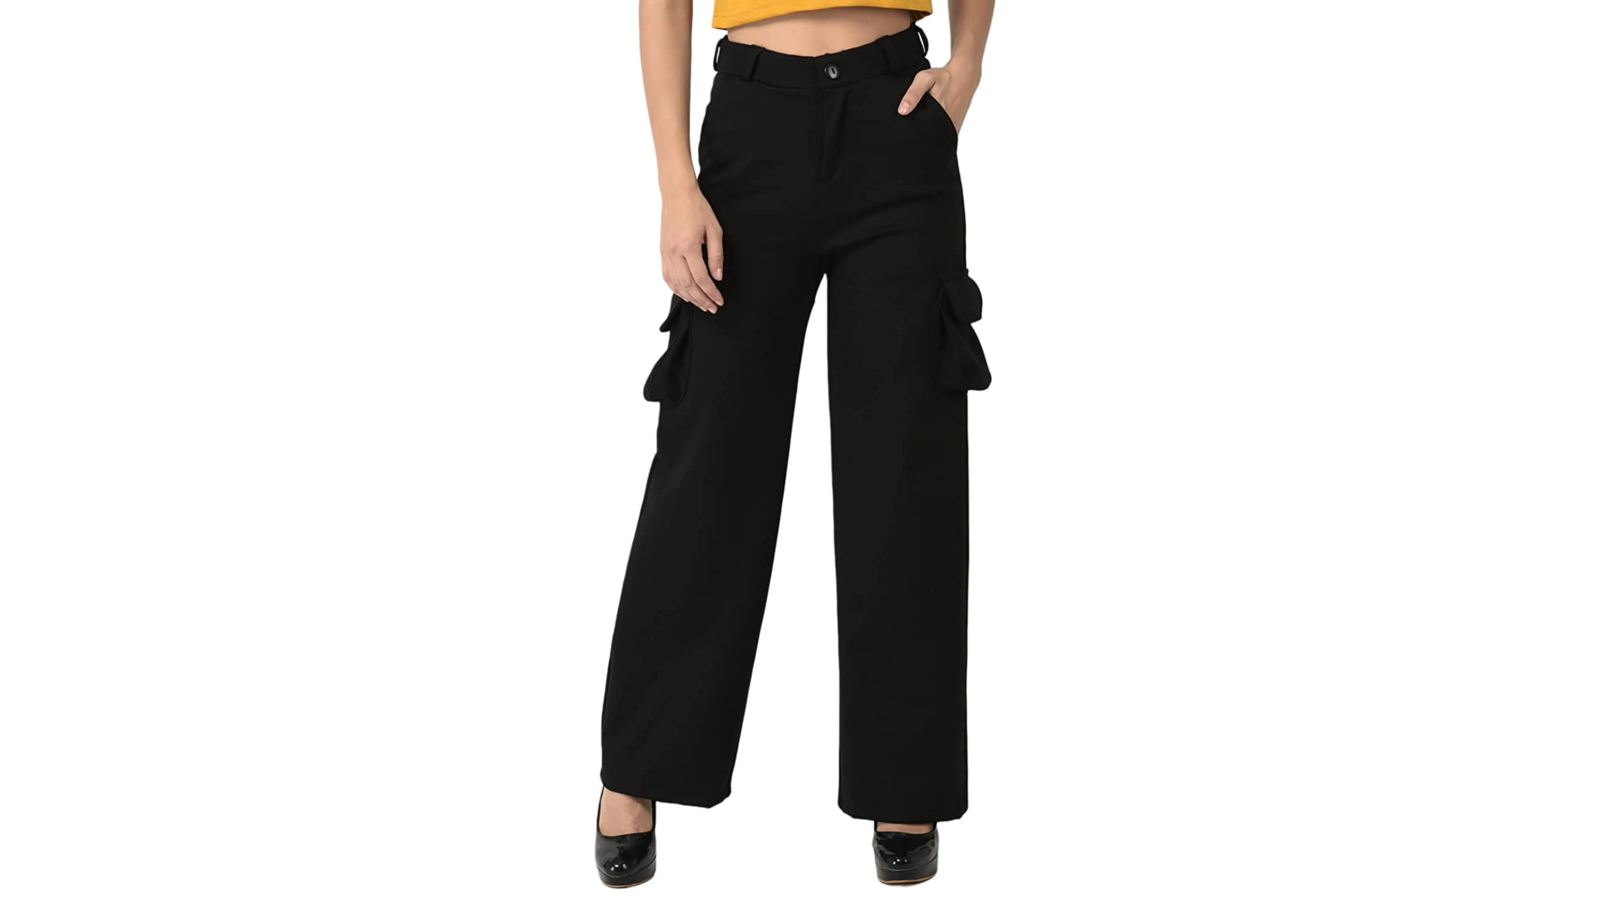 https://img.etimg.com/thumb/width-1600,height-900,imgsize-284551,resizemode-75,msid-101984944/top-trending-products/lifestyle/stylish-black-cargo-pants-for-women-for-a-chic-casual-look.jpg